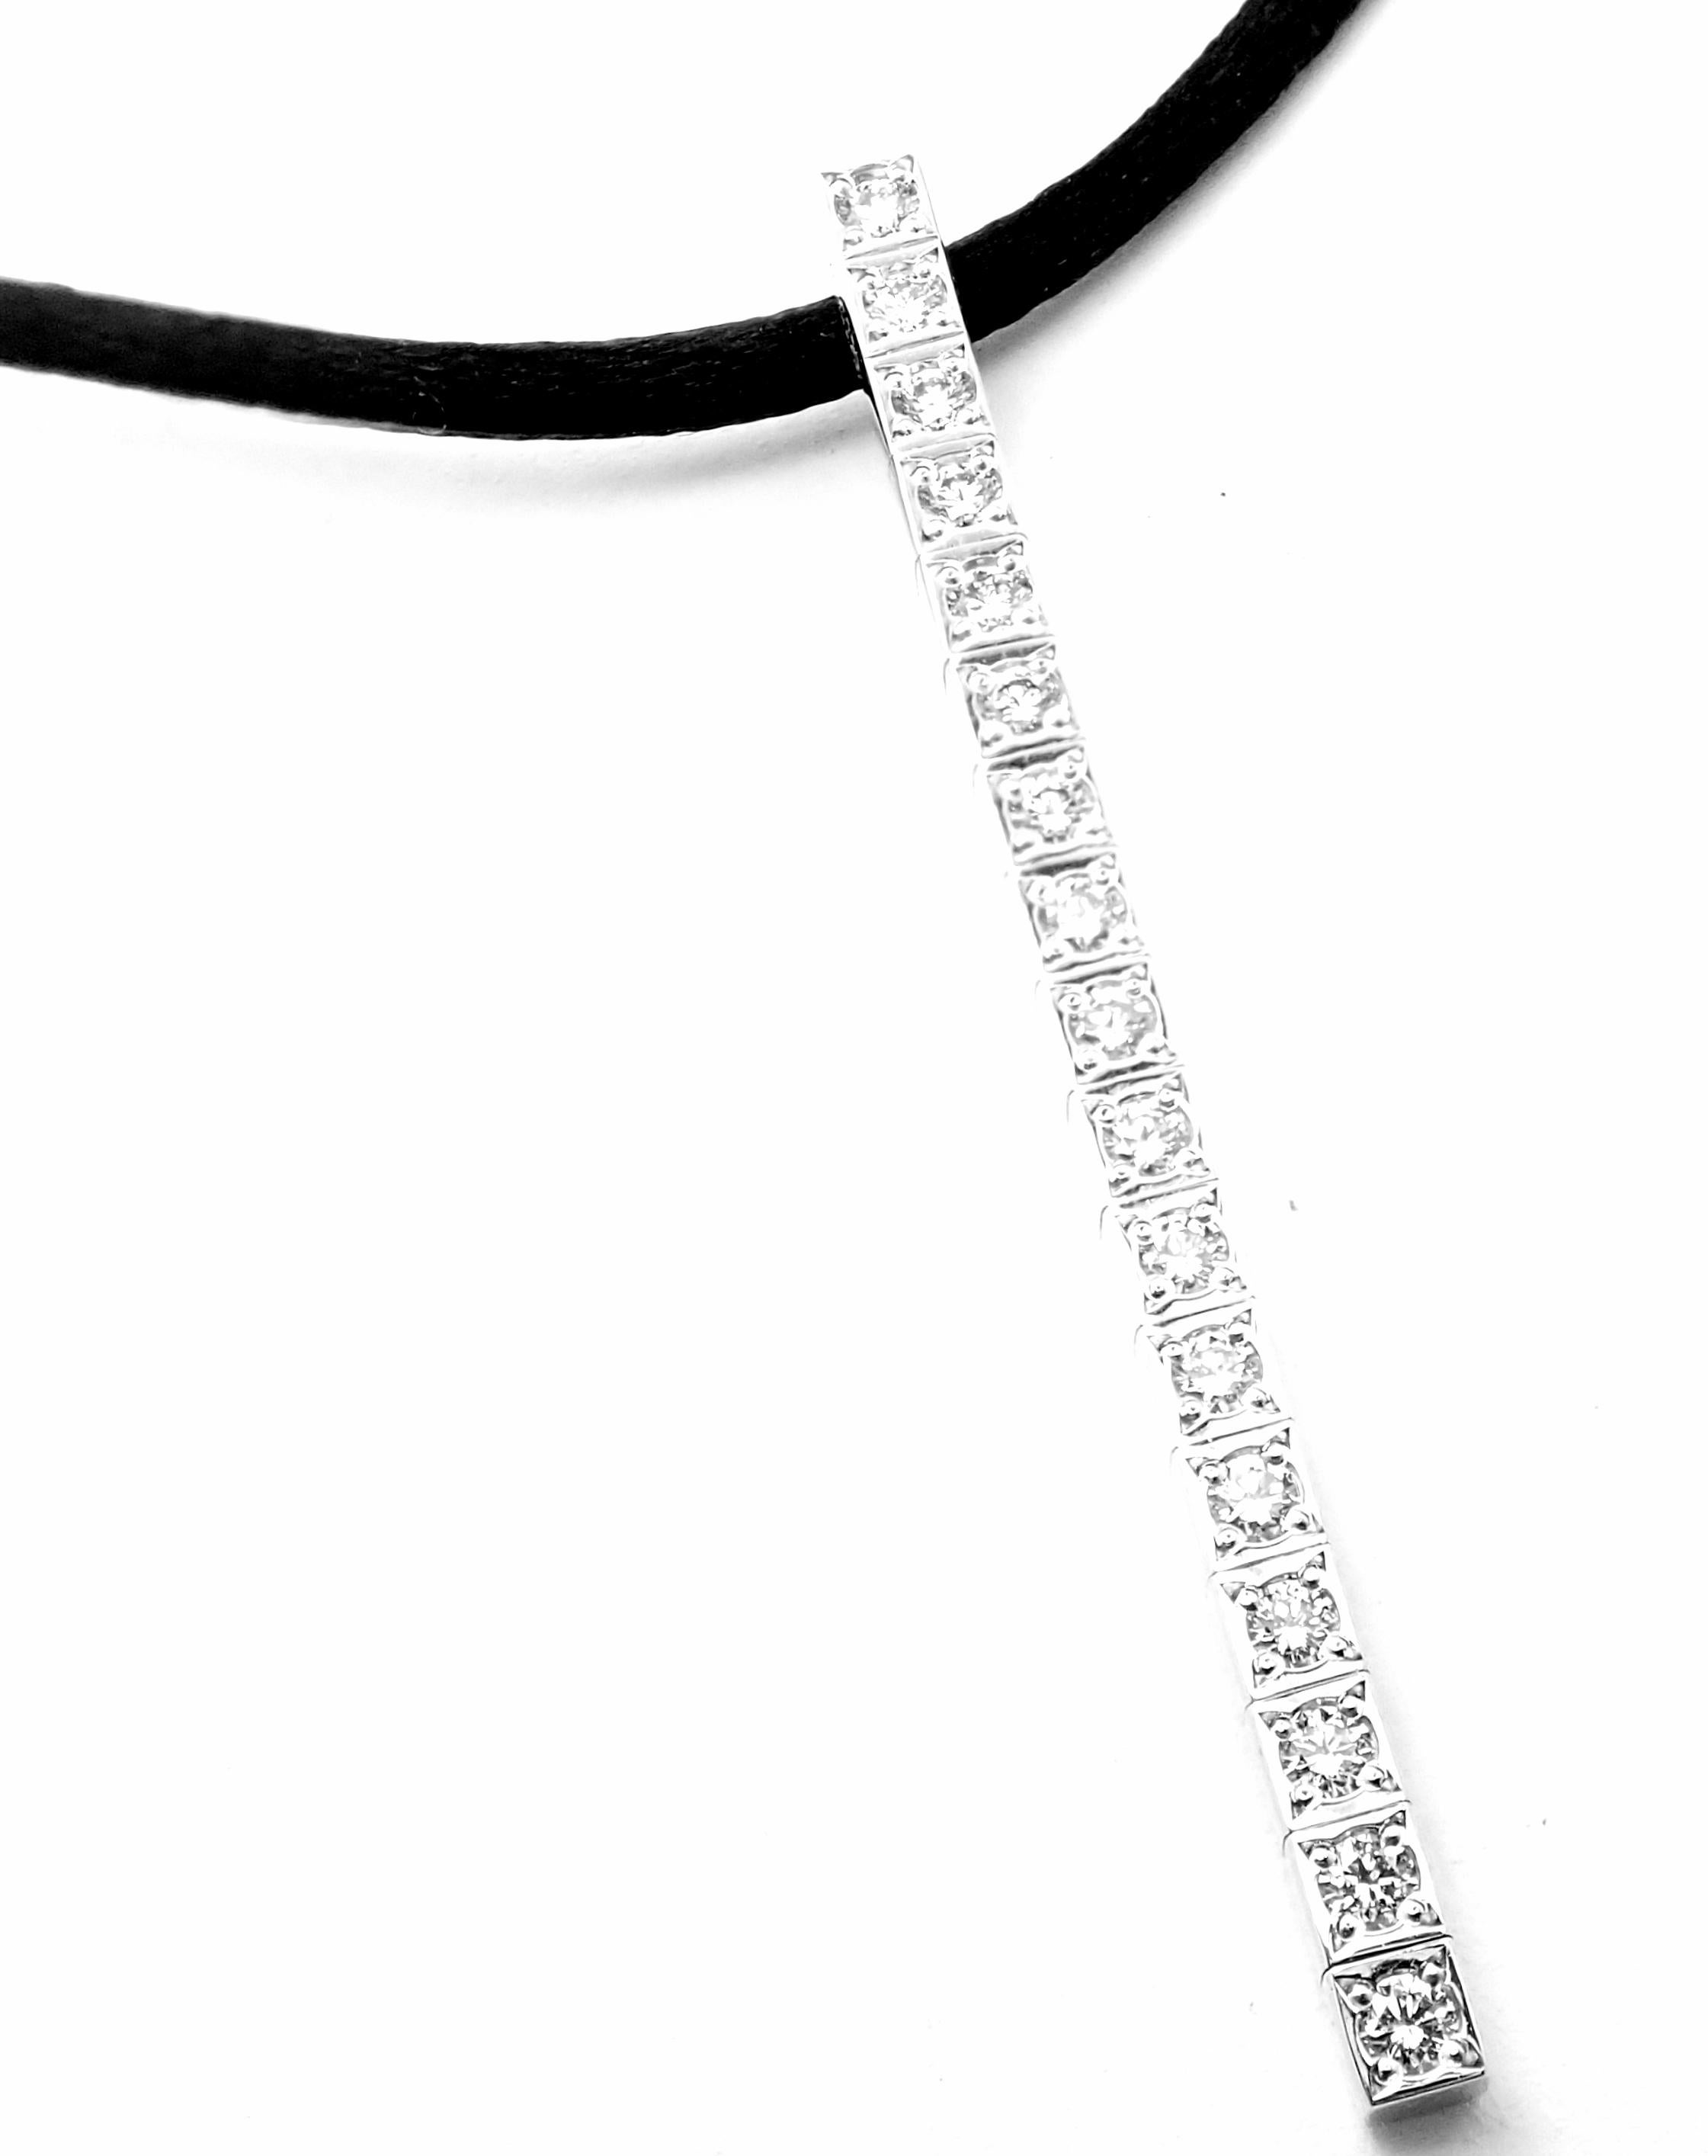 18k White Gold Lanieres Diamond Line Pendant on a Silk Cord Necklace by Cartier. 
With 17 round brilliant diamonds, E color, VVS1 clarity total weigh approximately .51ct
Details: 
Length: Length silk cord: 27'' 
Pendant:  50mm x 3mm
Weight: 6.8